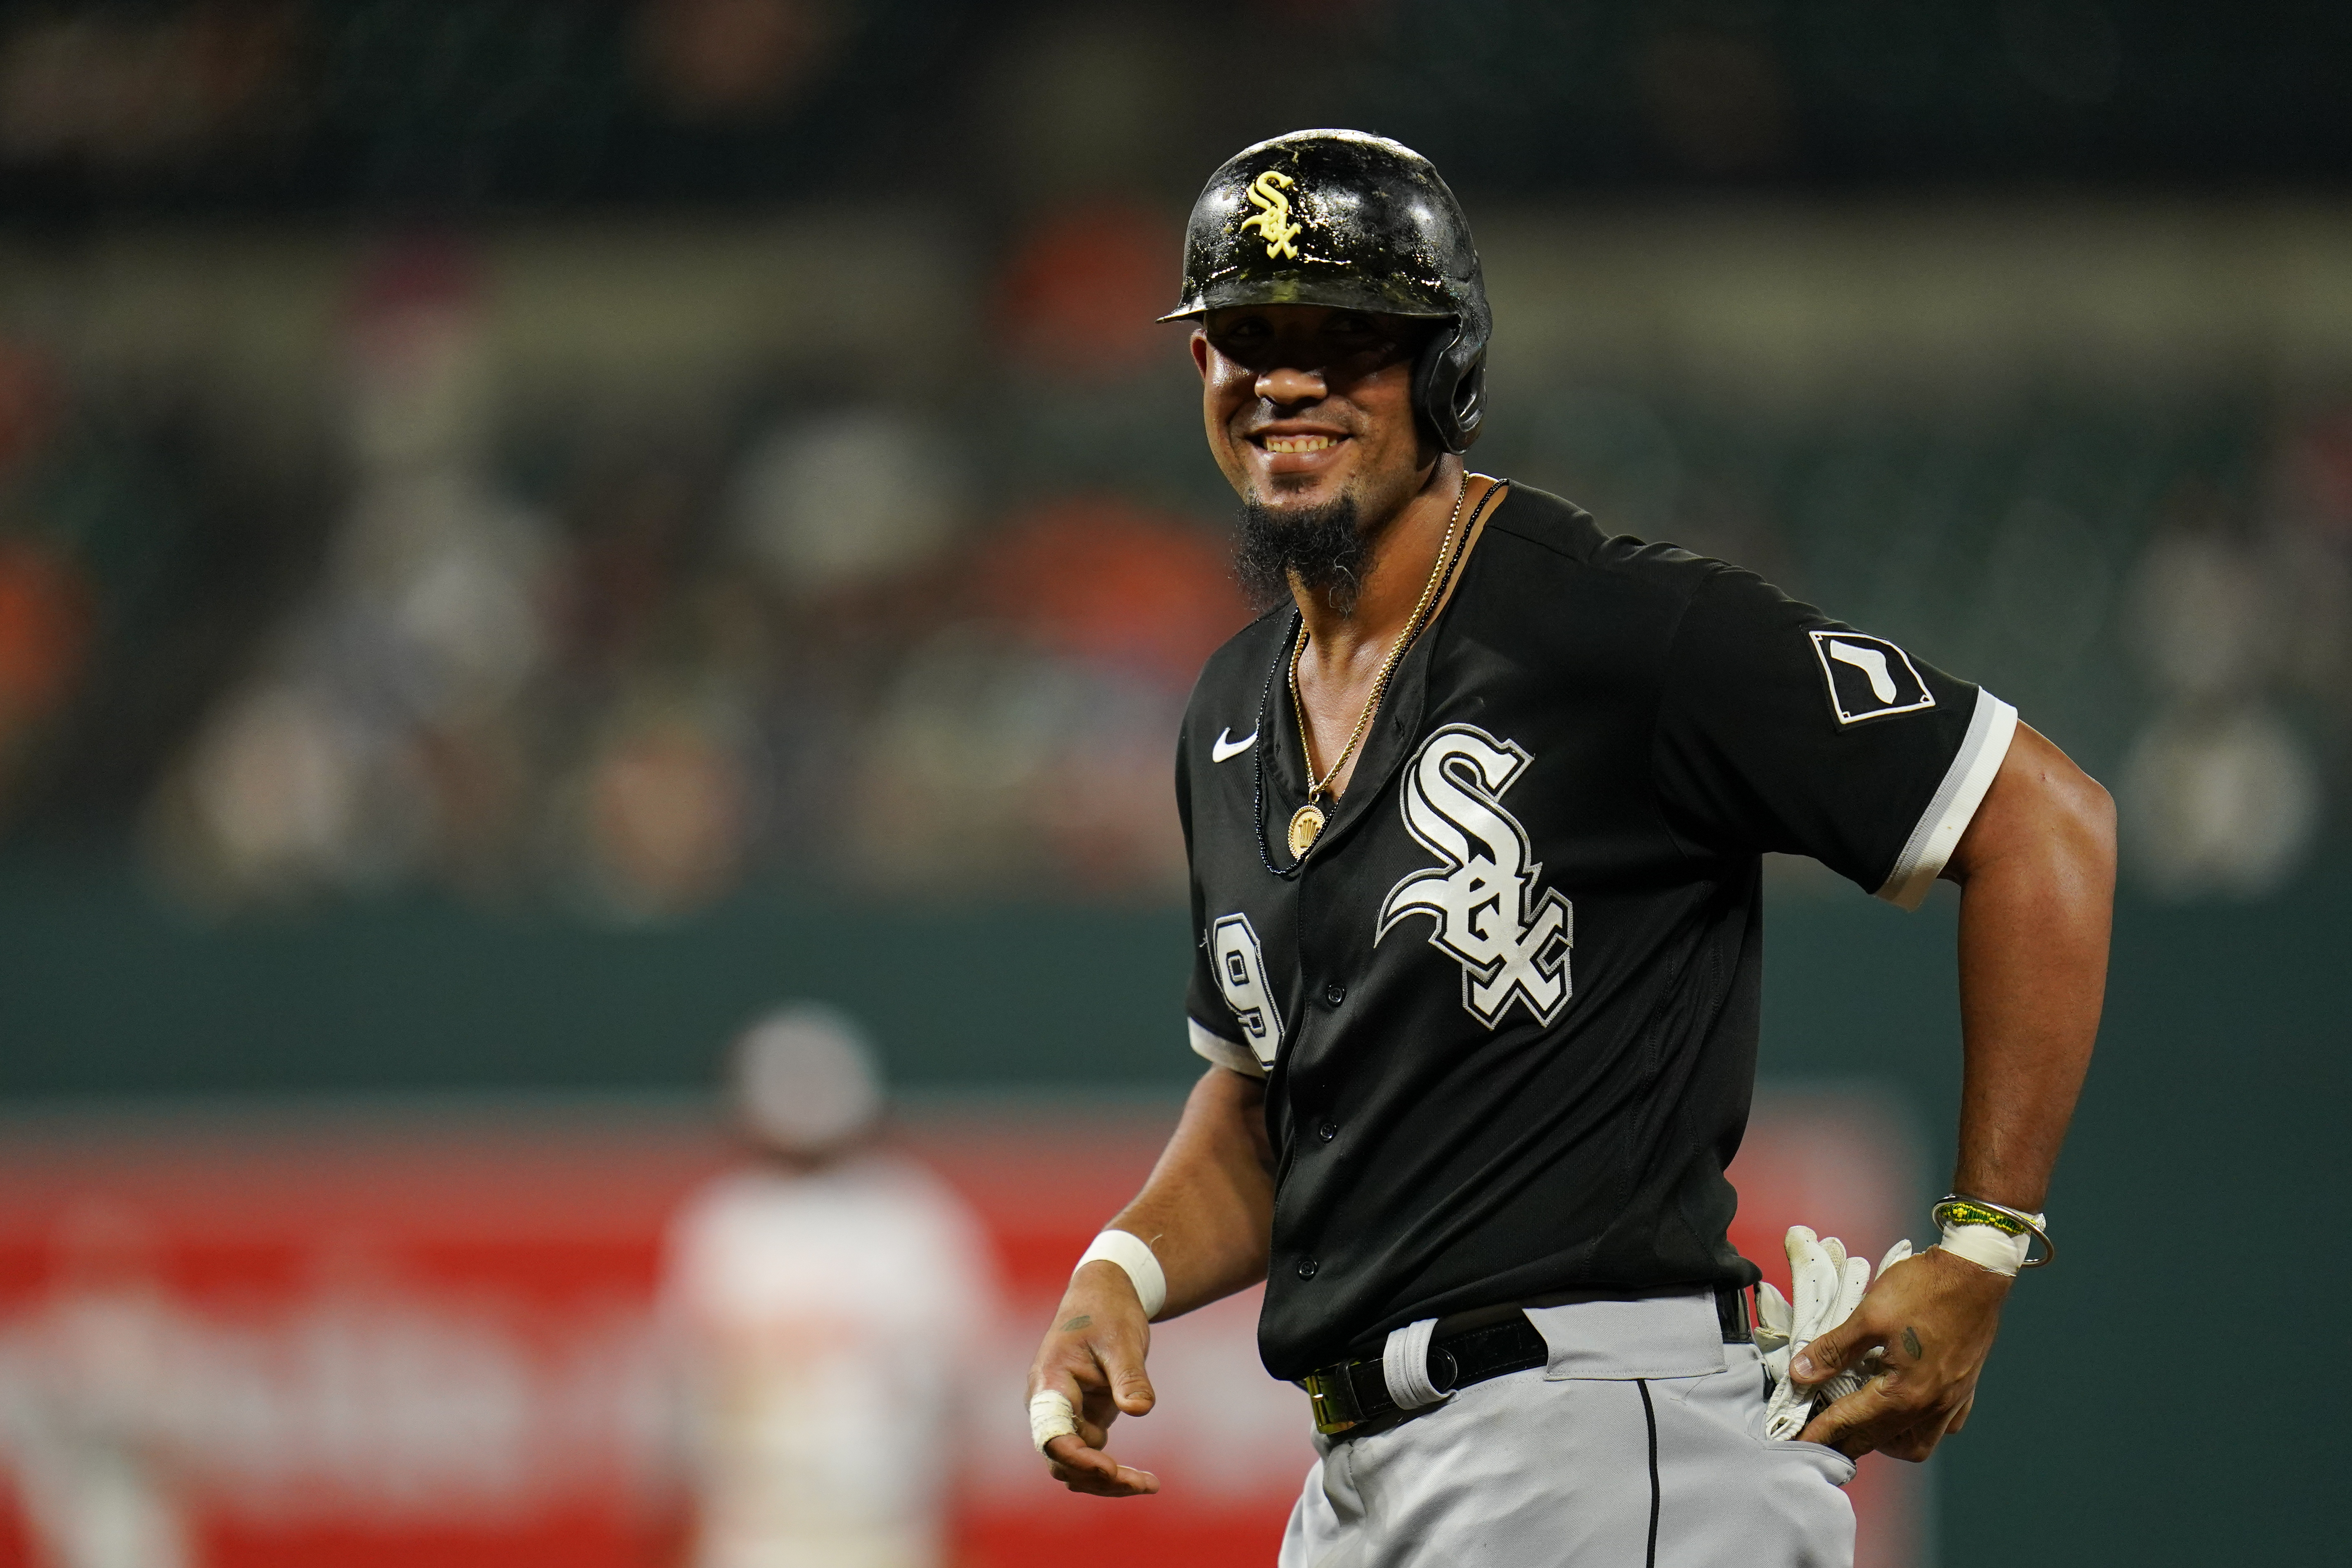 Red Sox rumors 2022: Offer to Jose Abreu was in 'low- to mid-$40